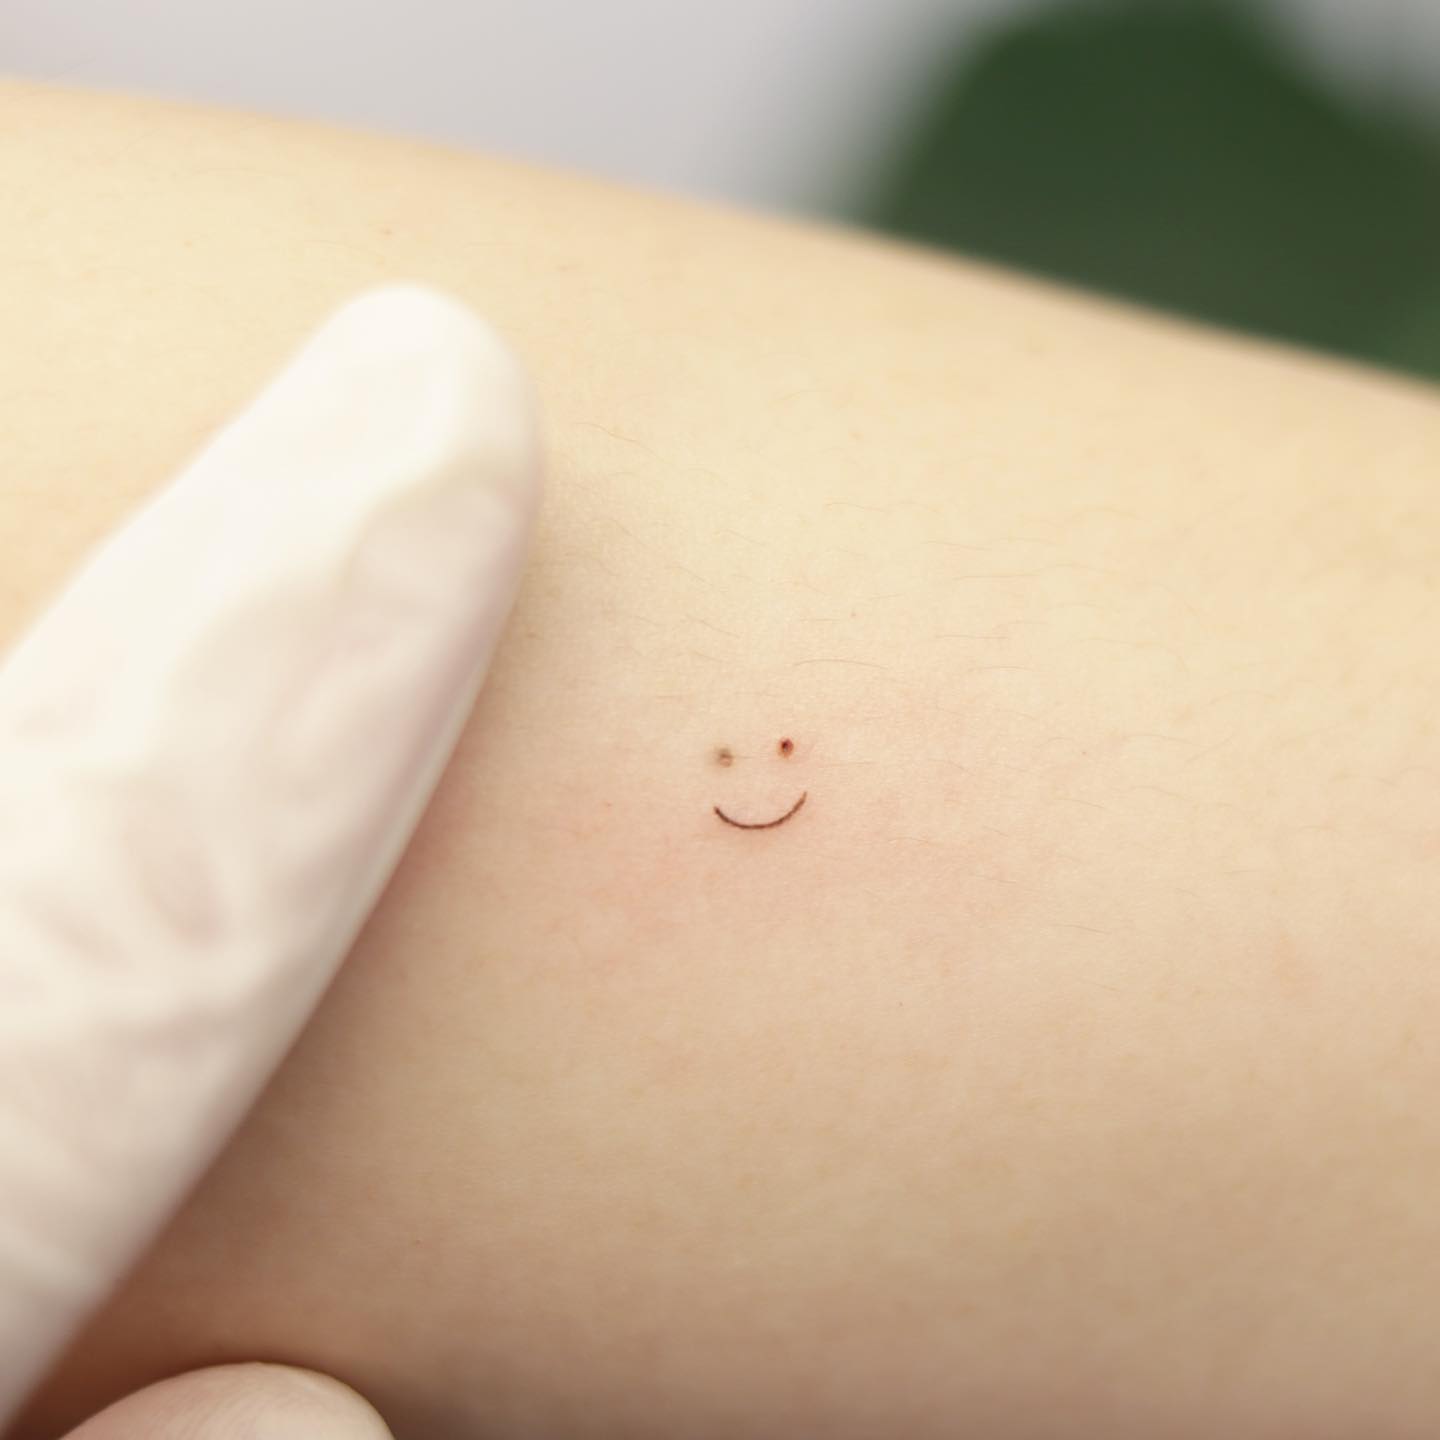 The Happiest Smiley Face Tattoo Ideas - TattooGlee | Smiley face tattoo,  Smile face tattoo, Toe tattoos